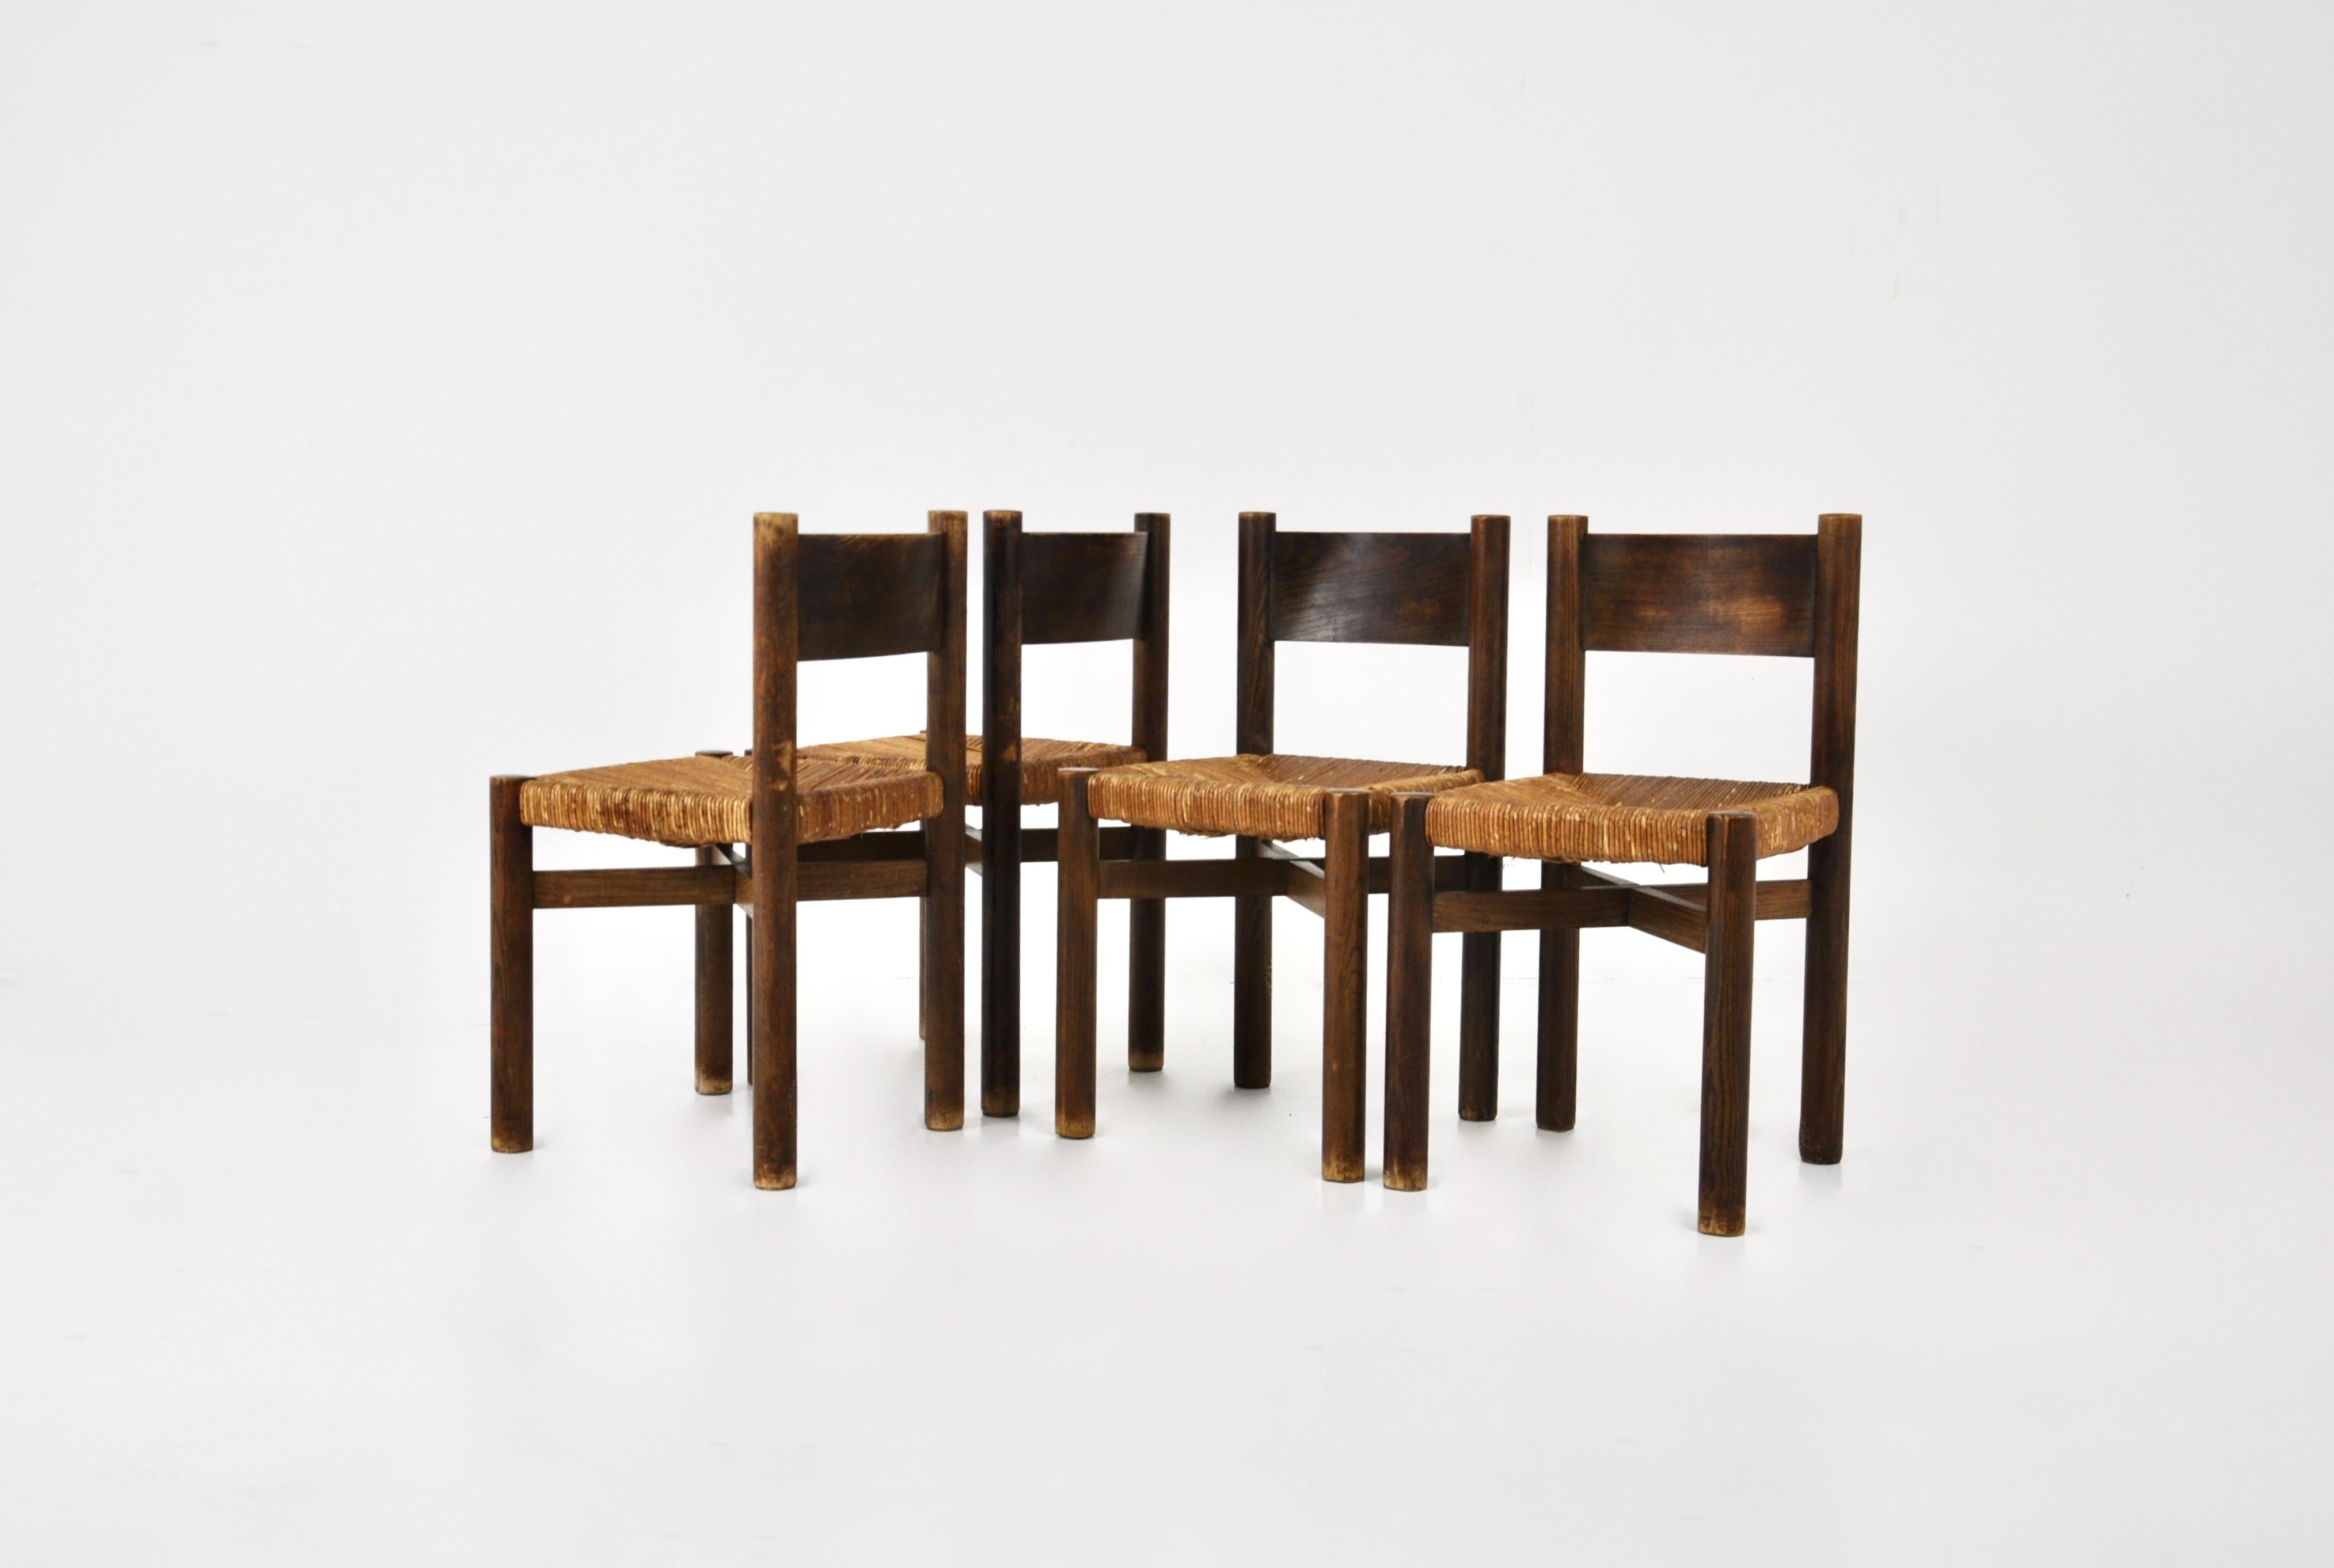 Set of 4 wooden chairs with straw seat designed by Charlotte Perriand in the 1950s, model: Meribel. Seat height: 45 cm. Wear due to time and age of the chair.